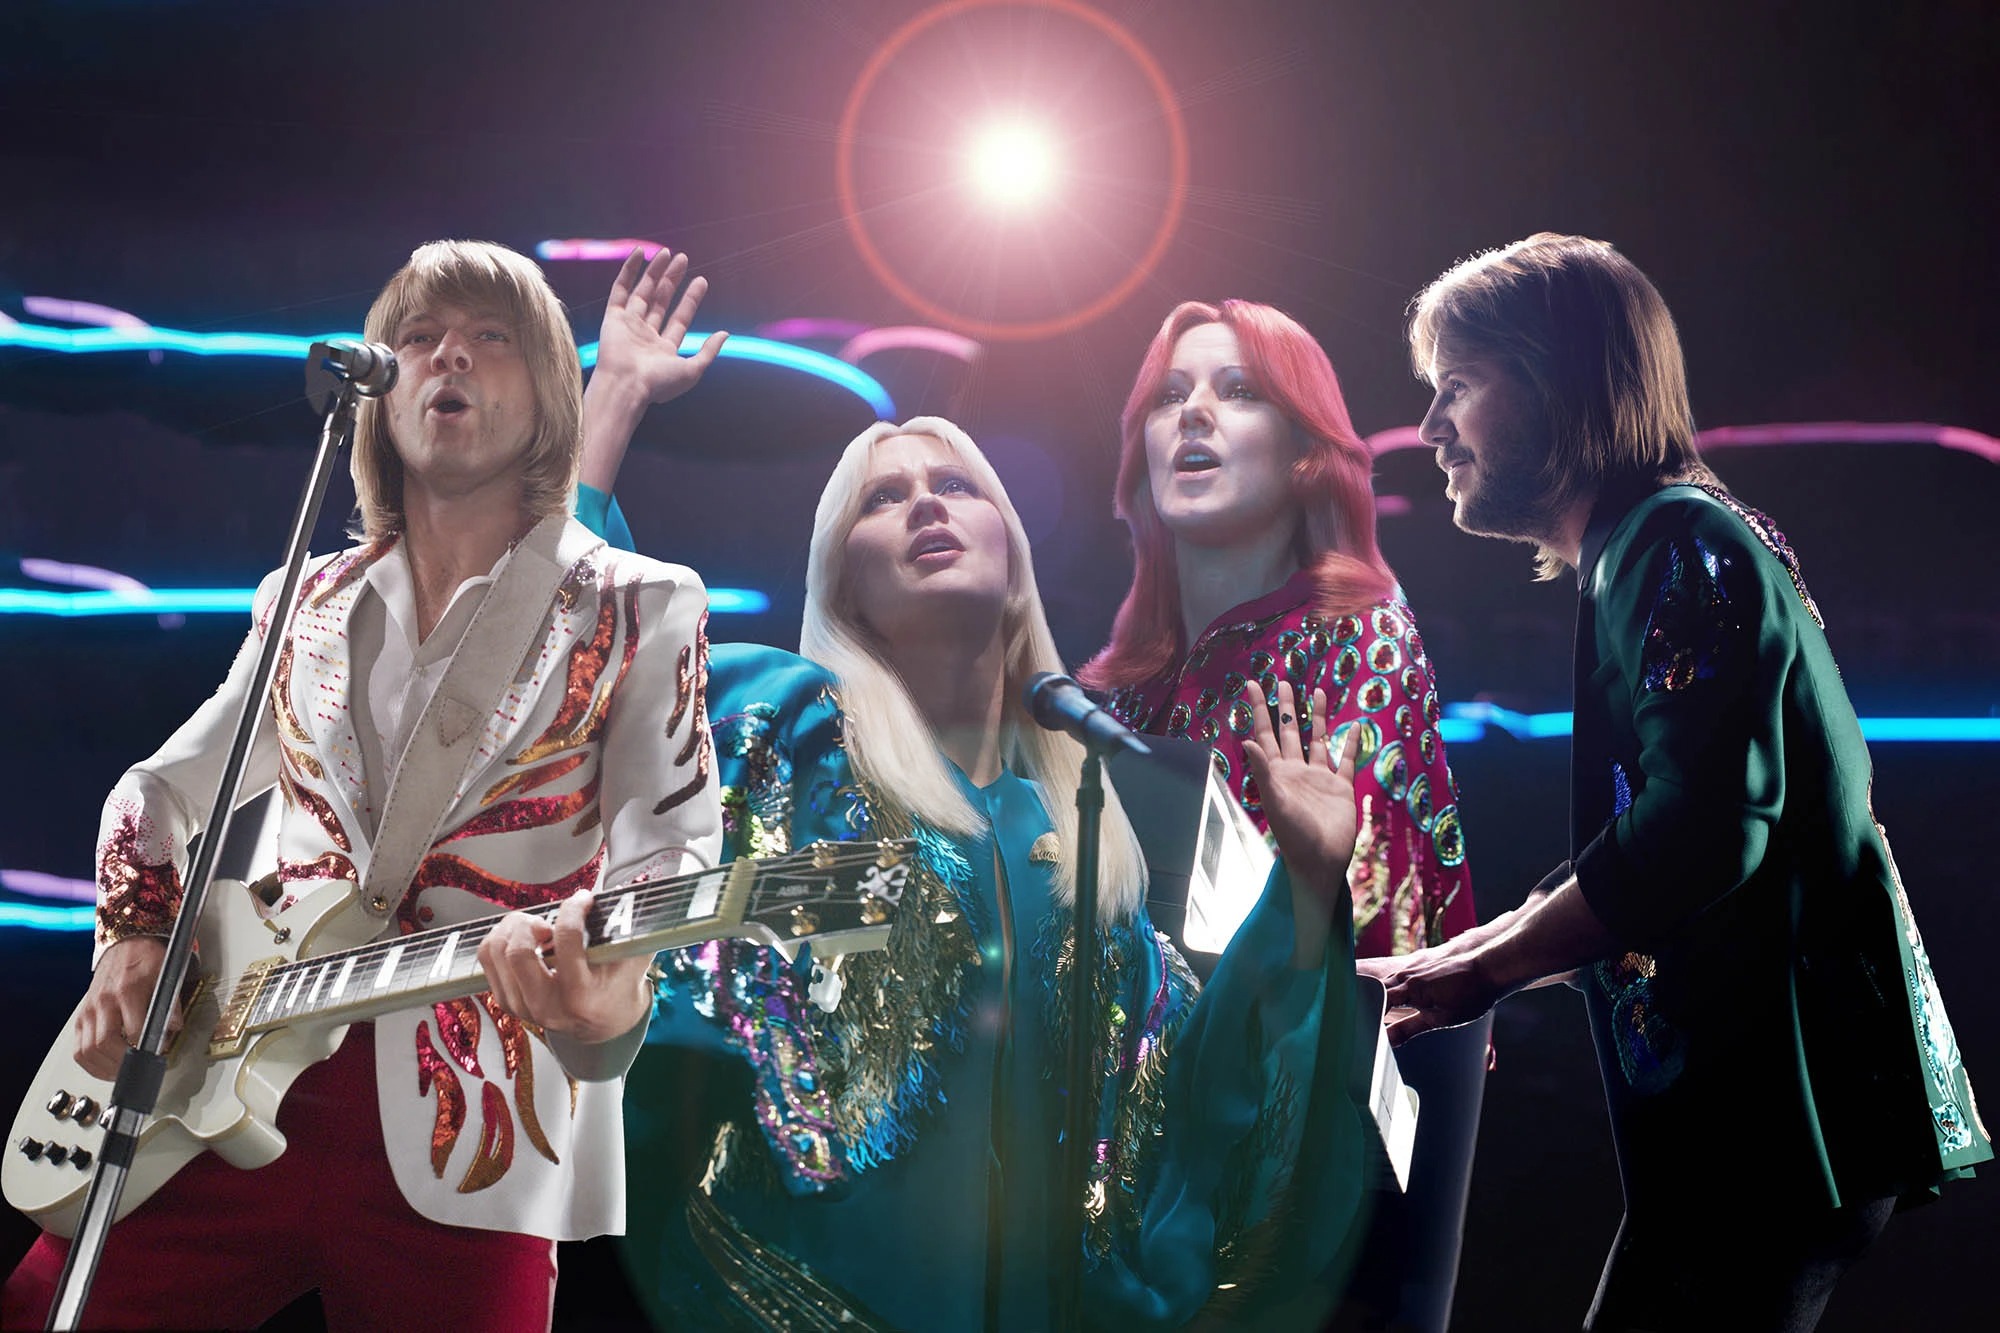 ABBA receives nominated for music's greatest award event, the GRAMMYs, in 2023. (2)